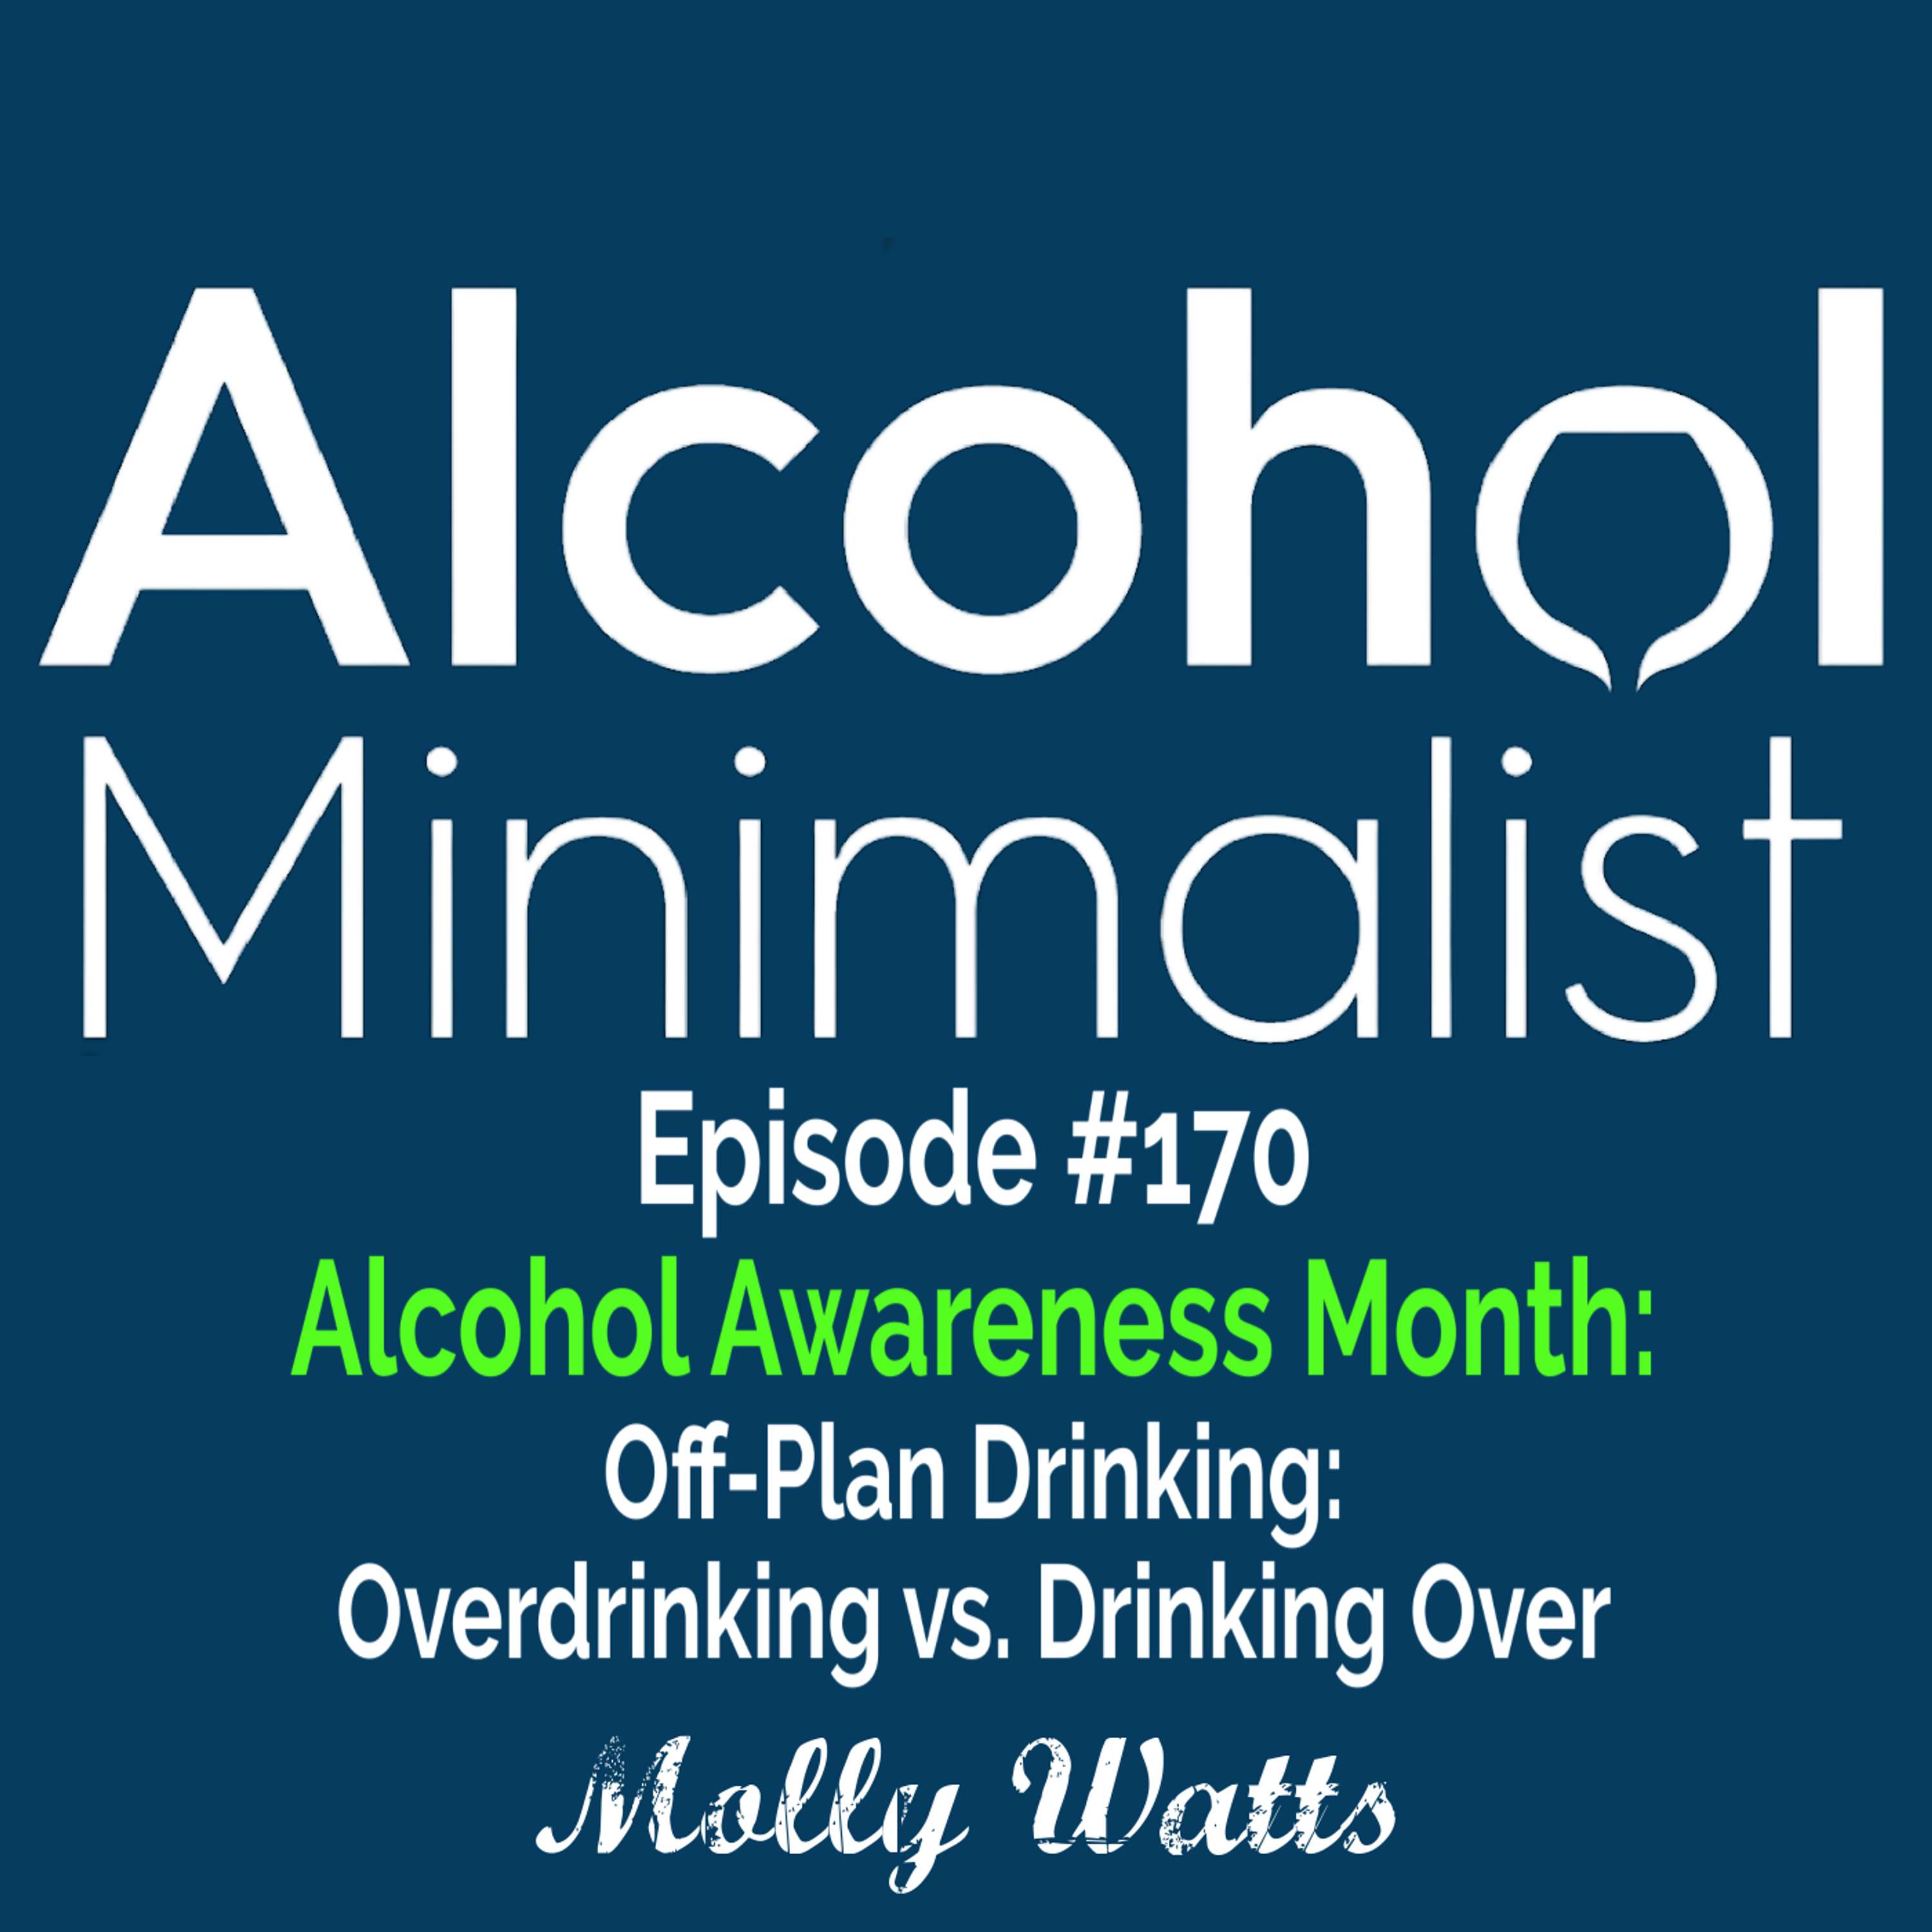 Alcohol Awareness Month-Off Plan Drinking: Overdrinking vs. Drinking Over